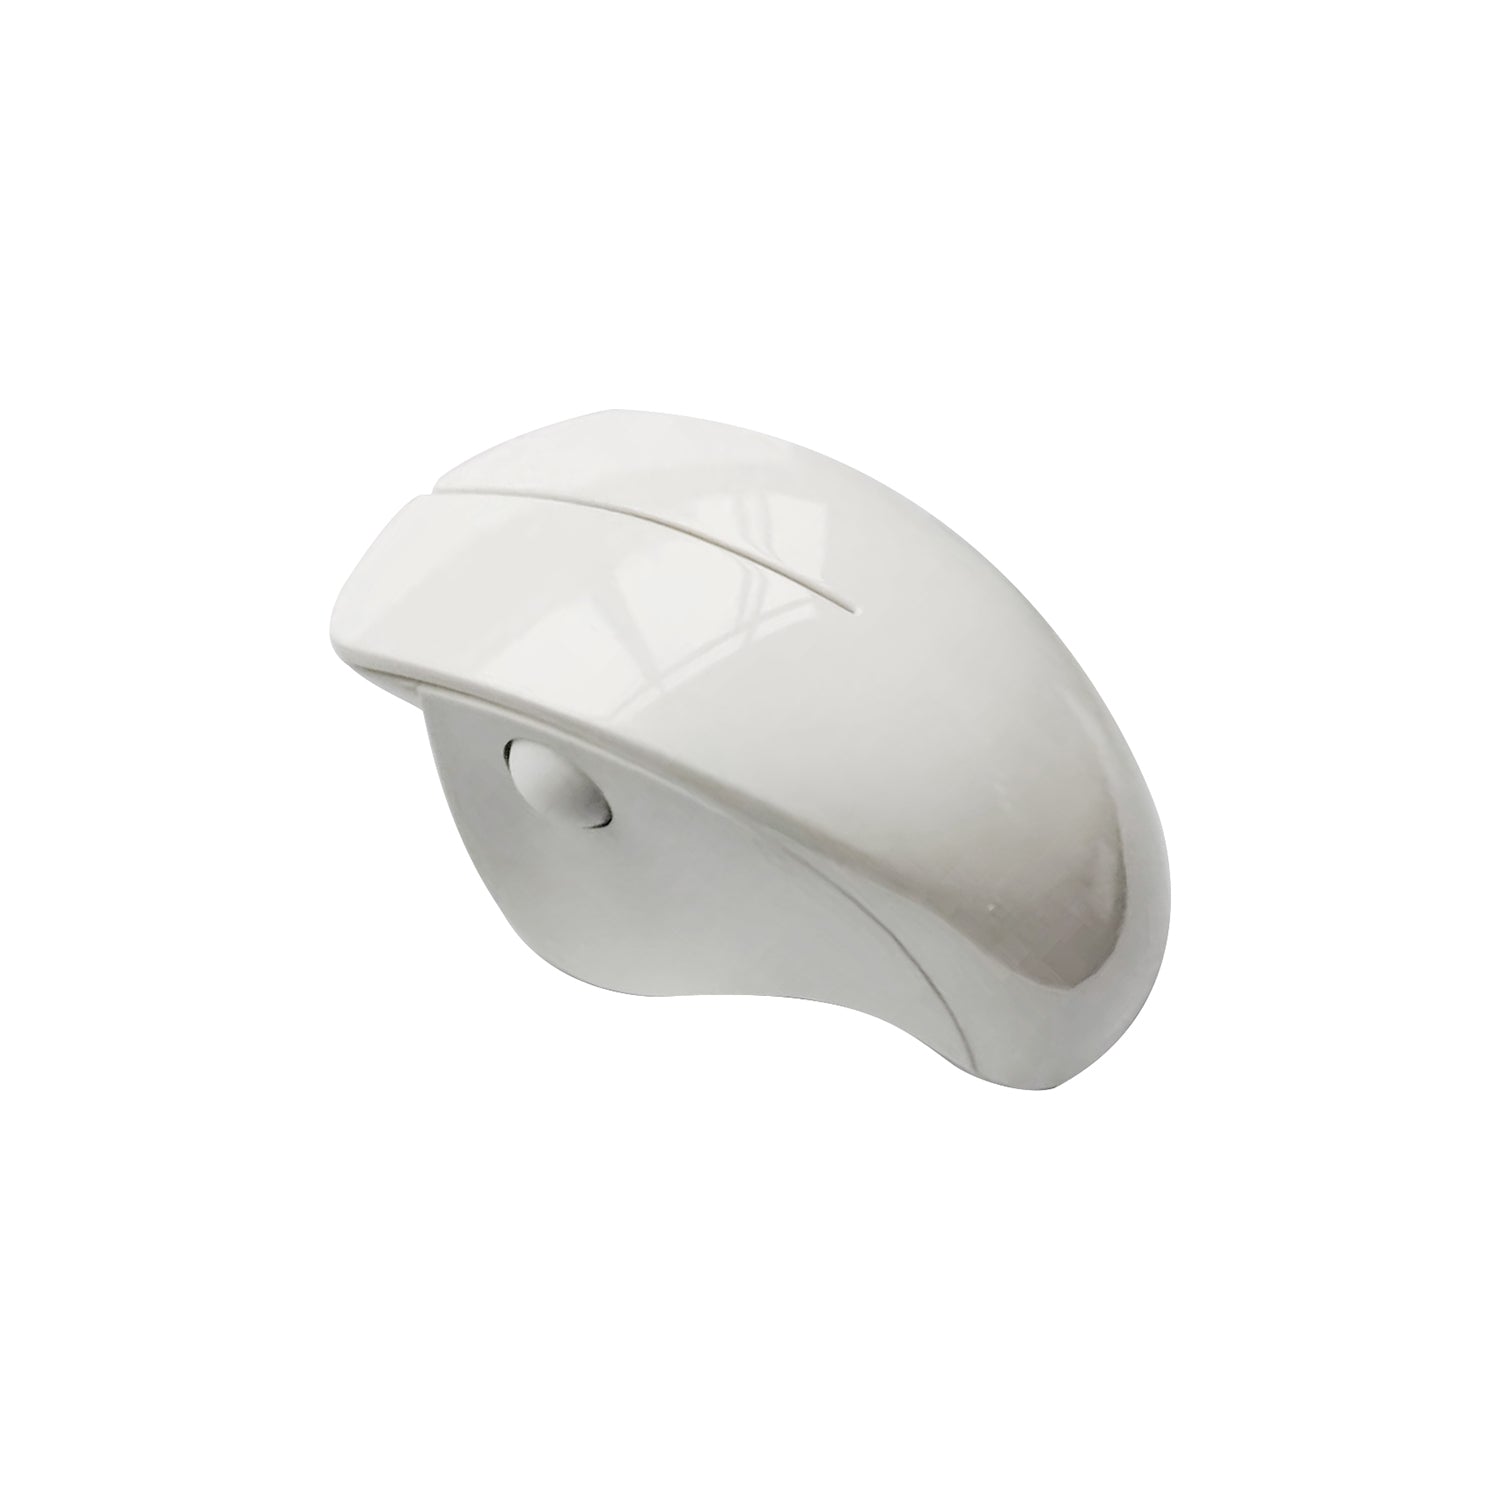 MINISO 2.4G WIRELESS MOUSE  MODEL: M906(WHITE) 2012550911109 WIRELESS MOUSE